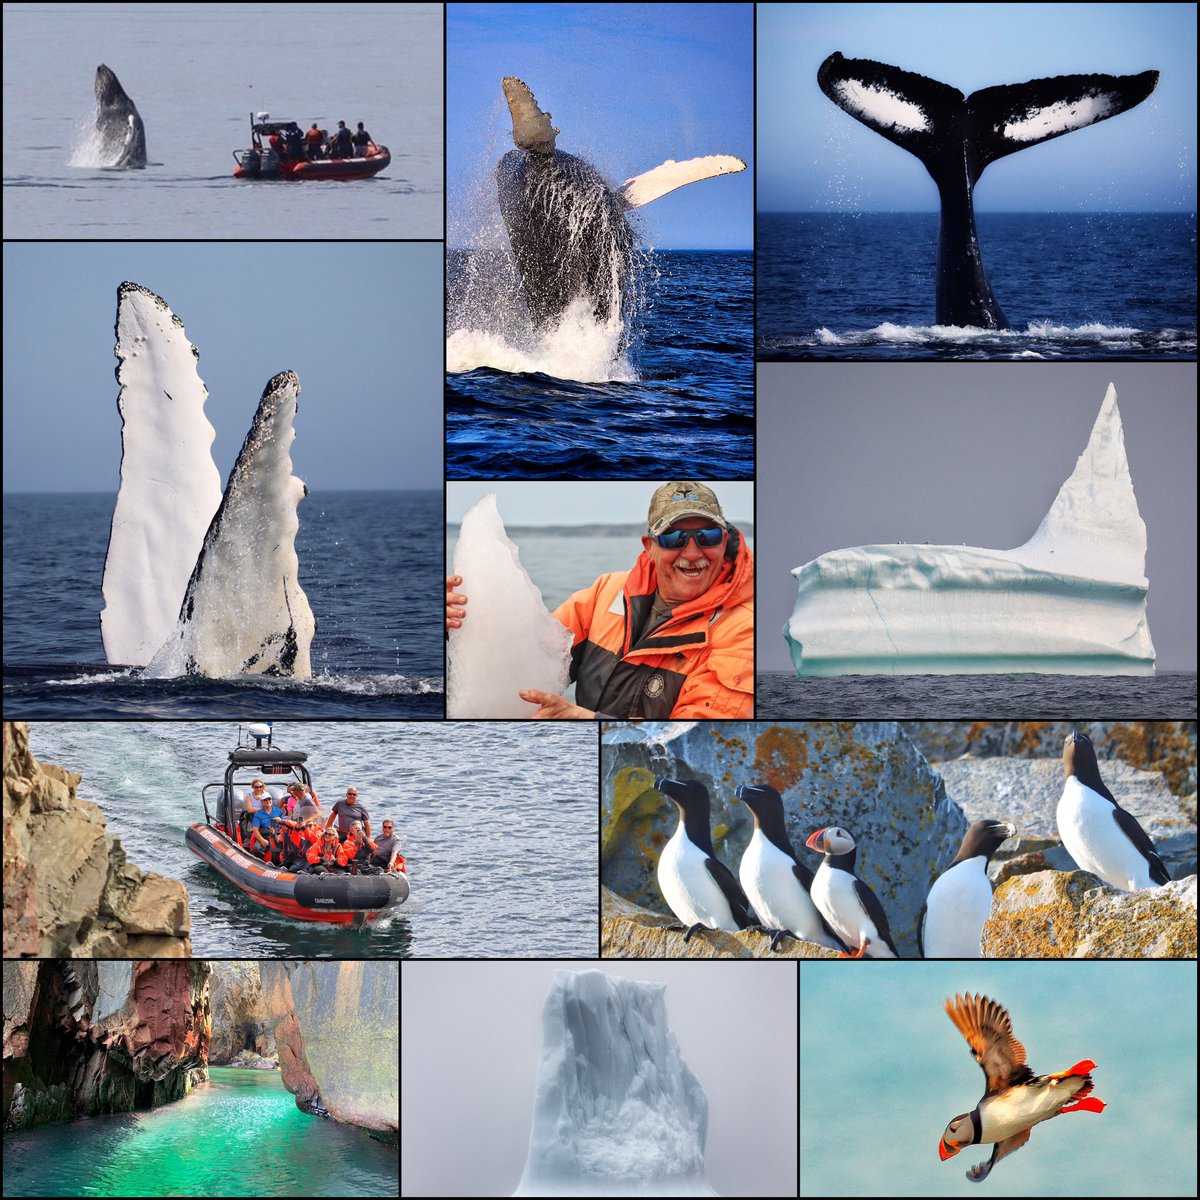 Good morning!! Giving a little shout out to my buddy, Capt. Bob Currie of @discoveryseabob!! All of these pics I took while out on his awesome boat tour here in Bonavista, NL. Be sure to book if you’re visiting the area! dsatours.com